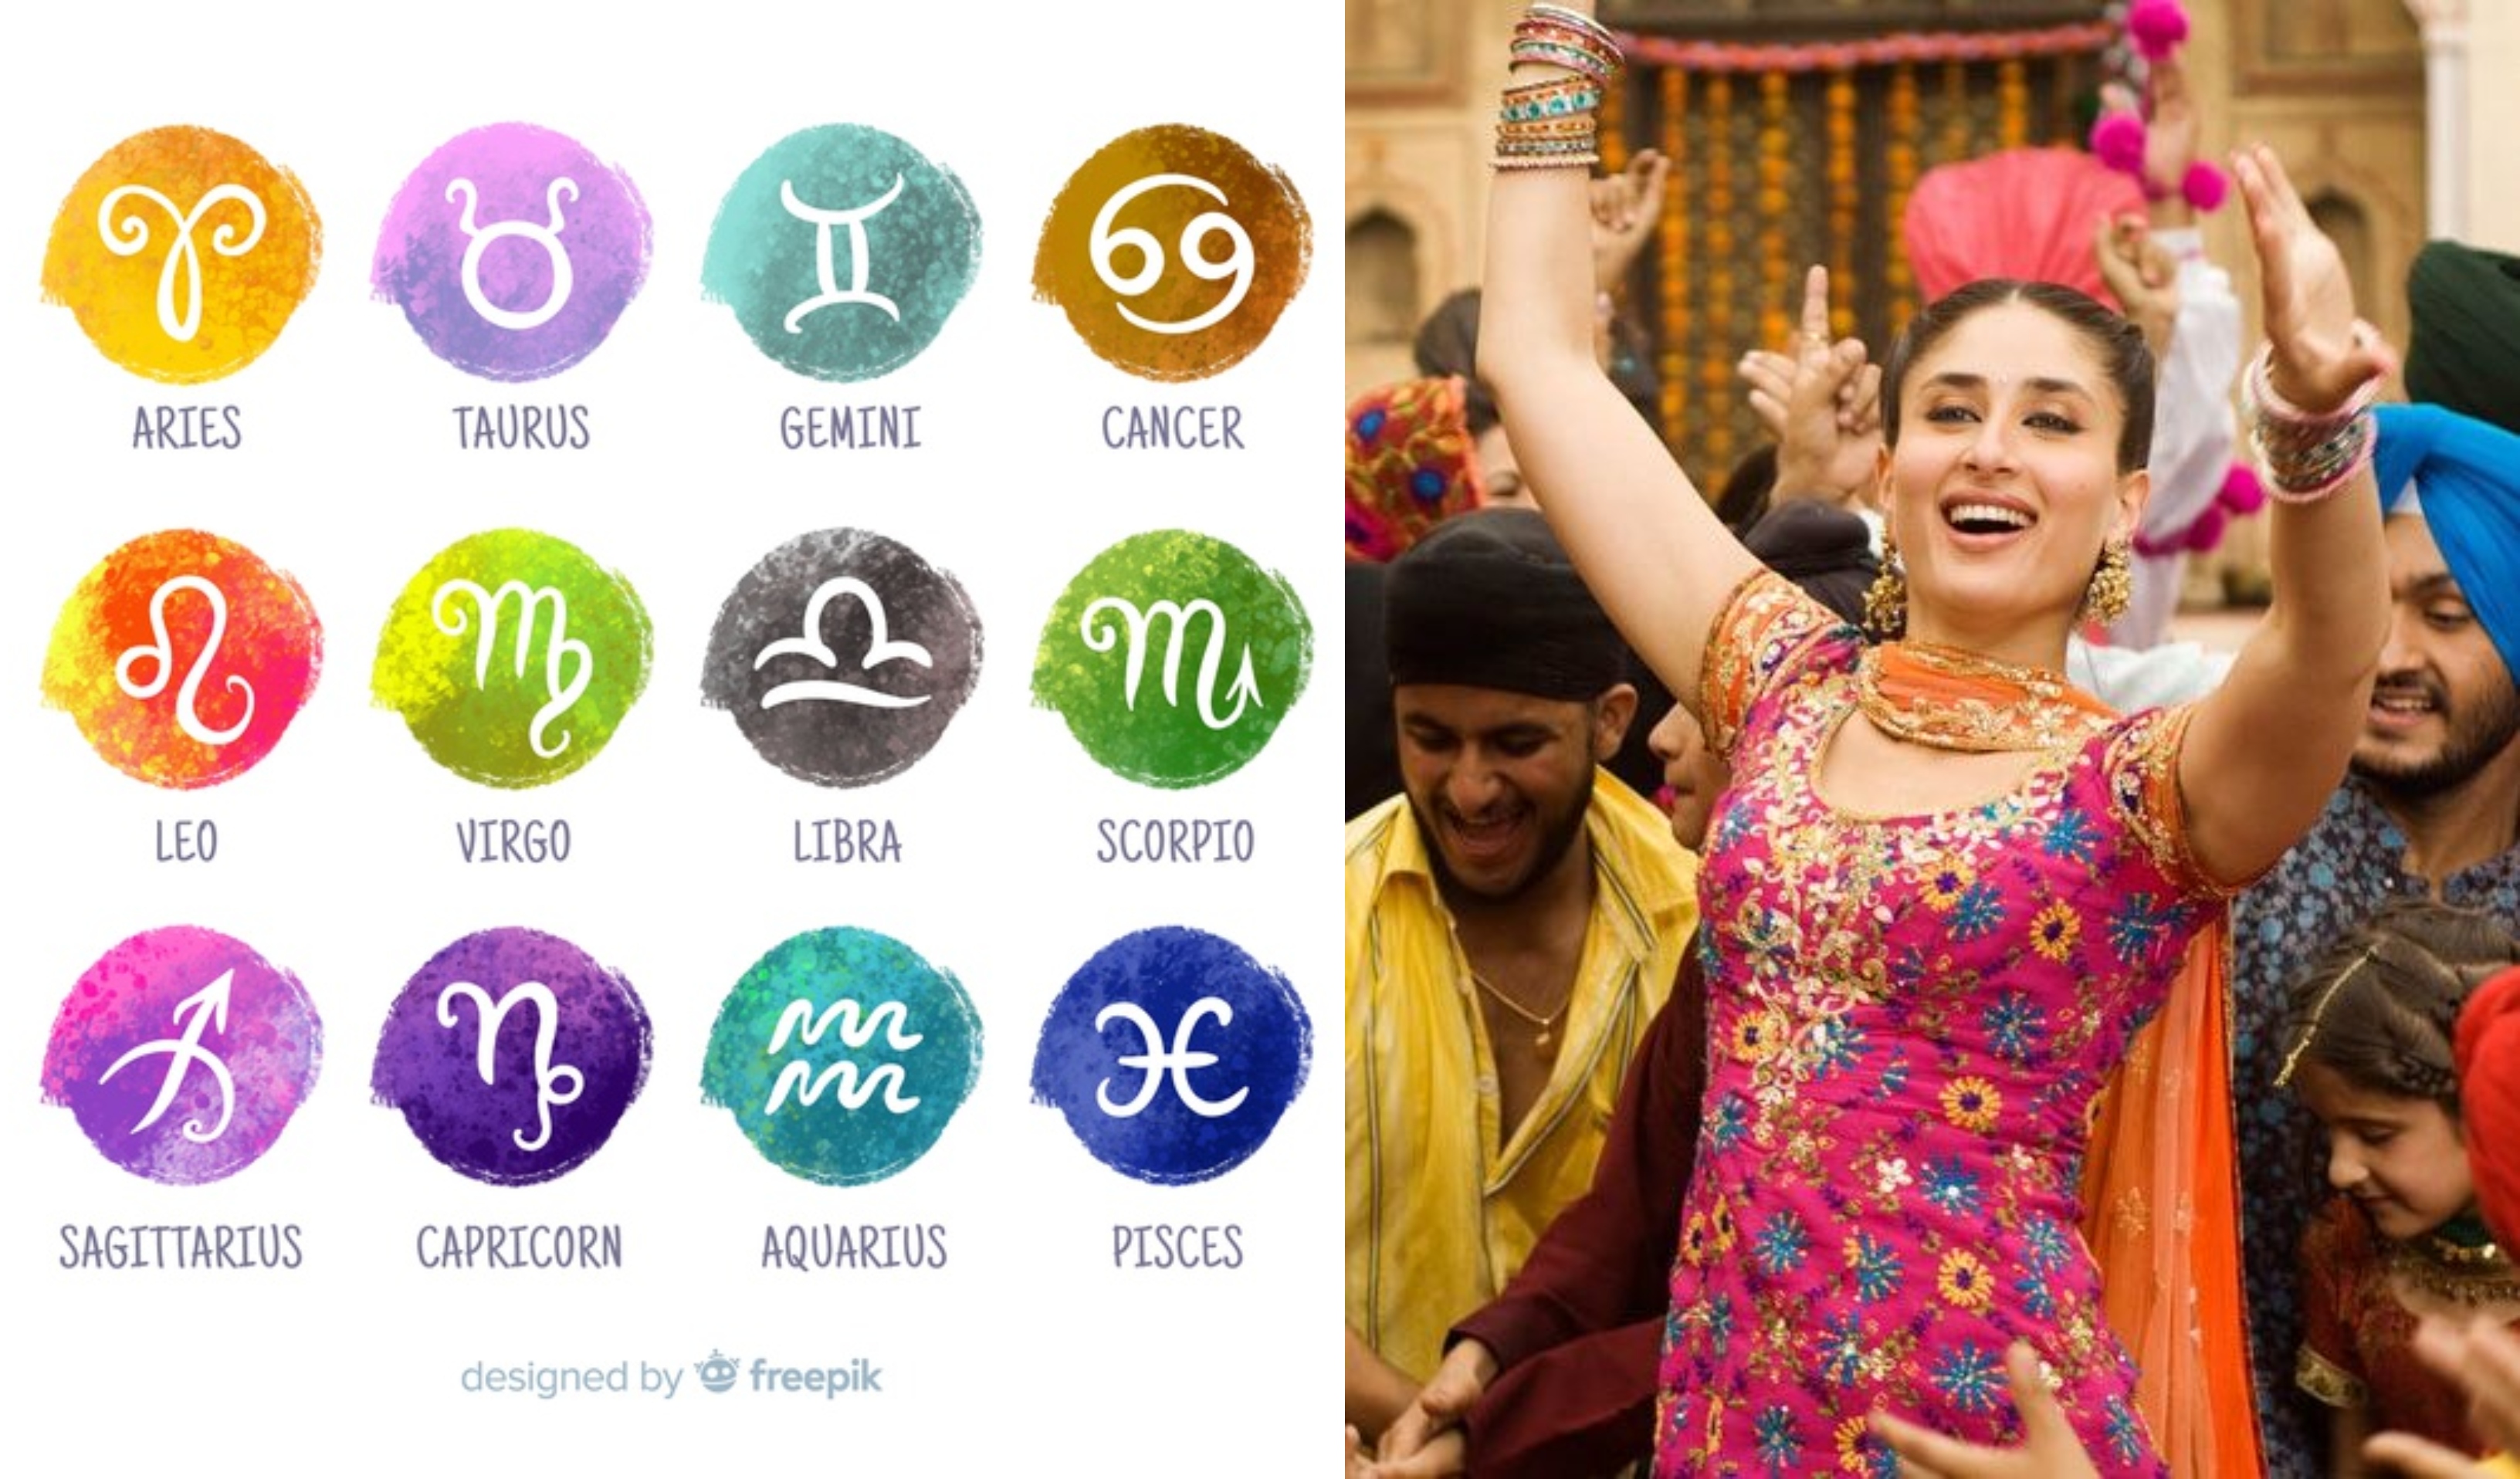 What does your zodiac sign say about you in Bollywood?